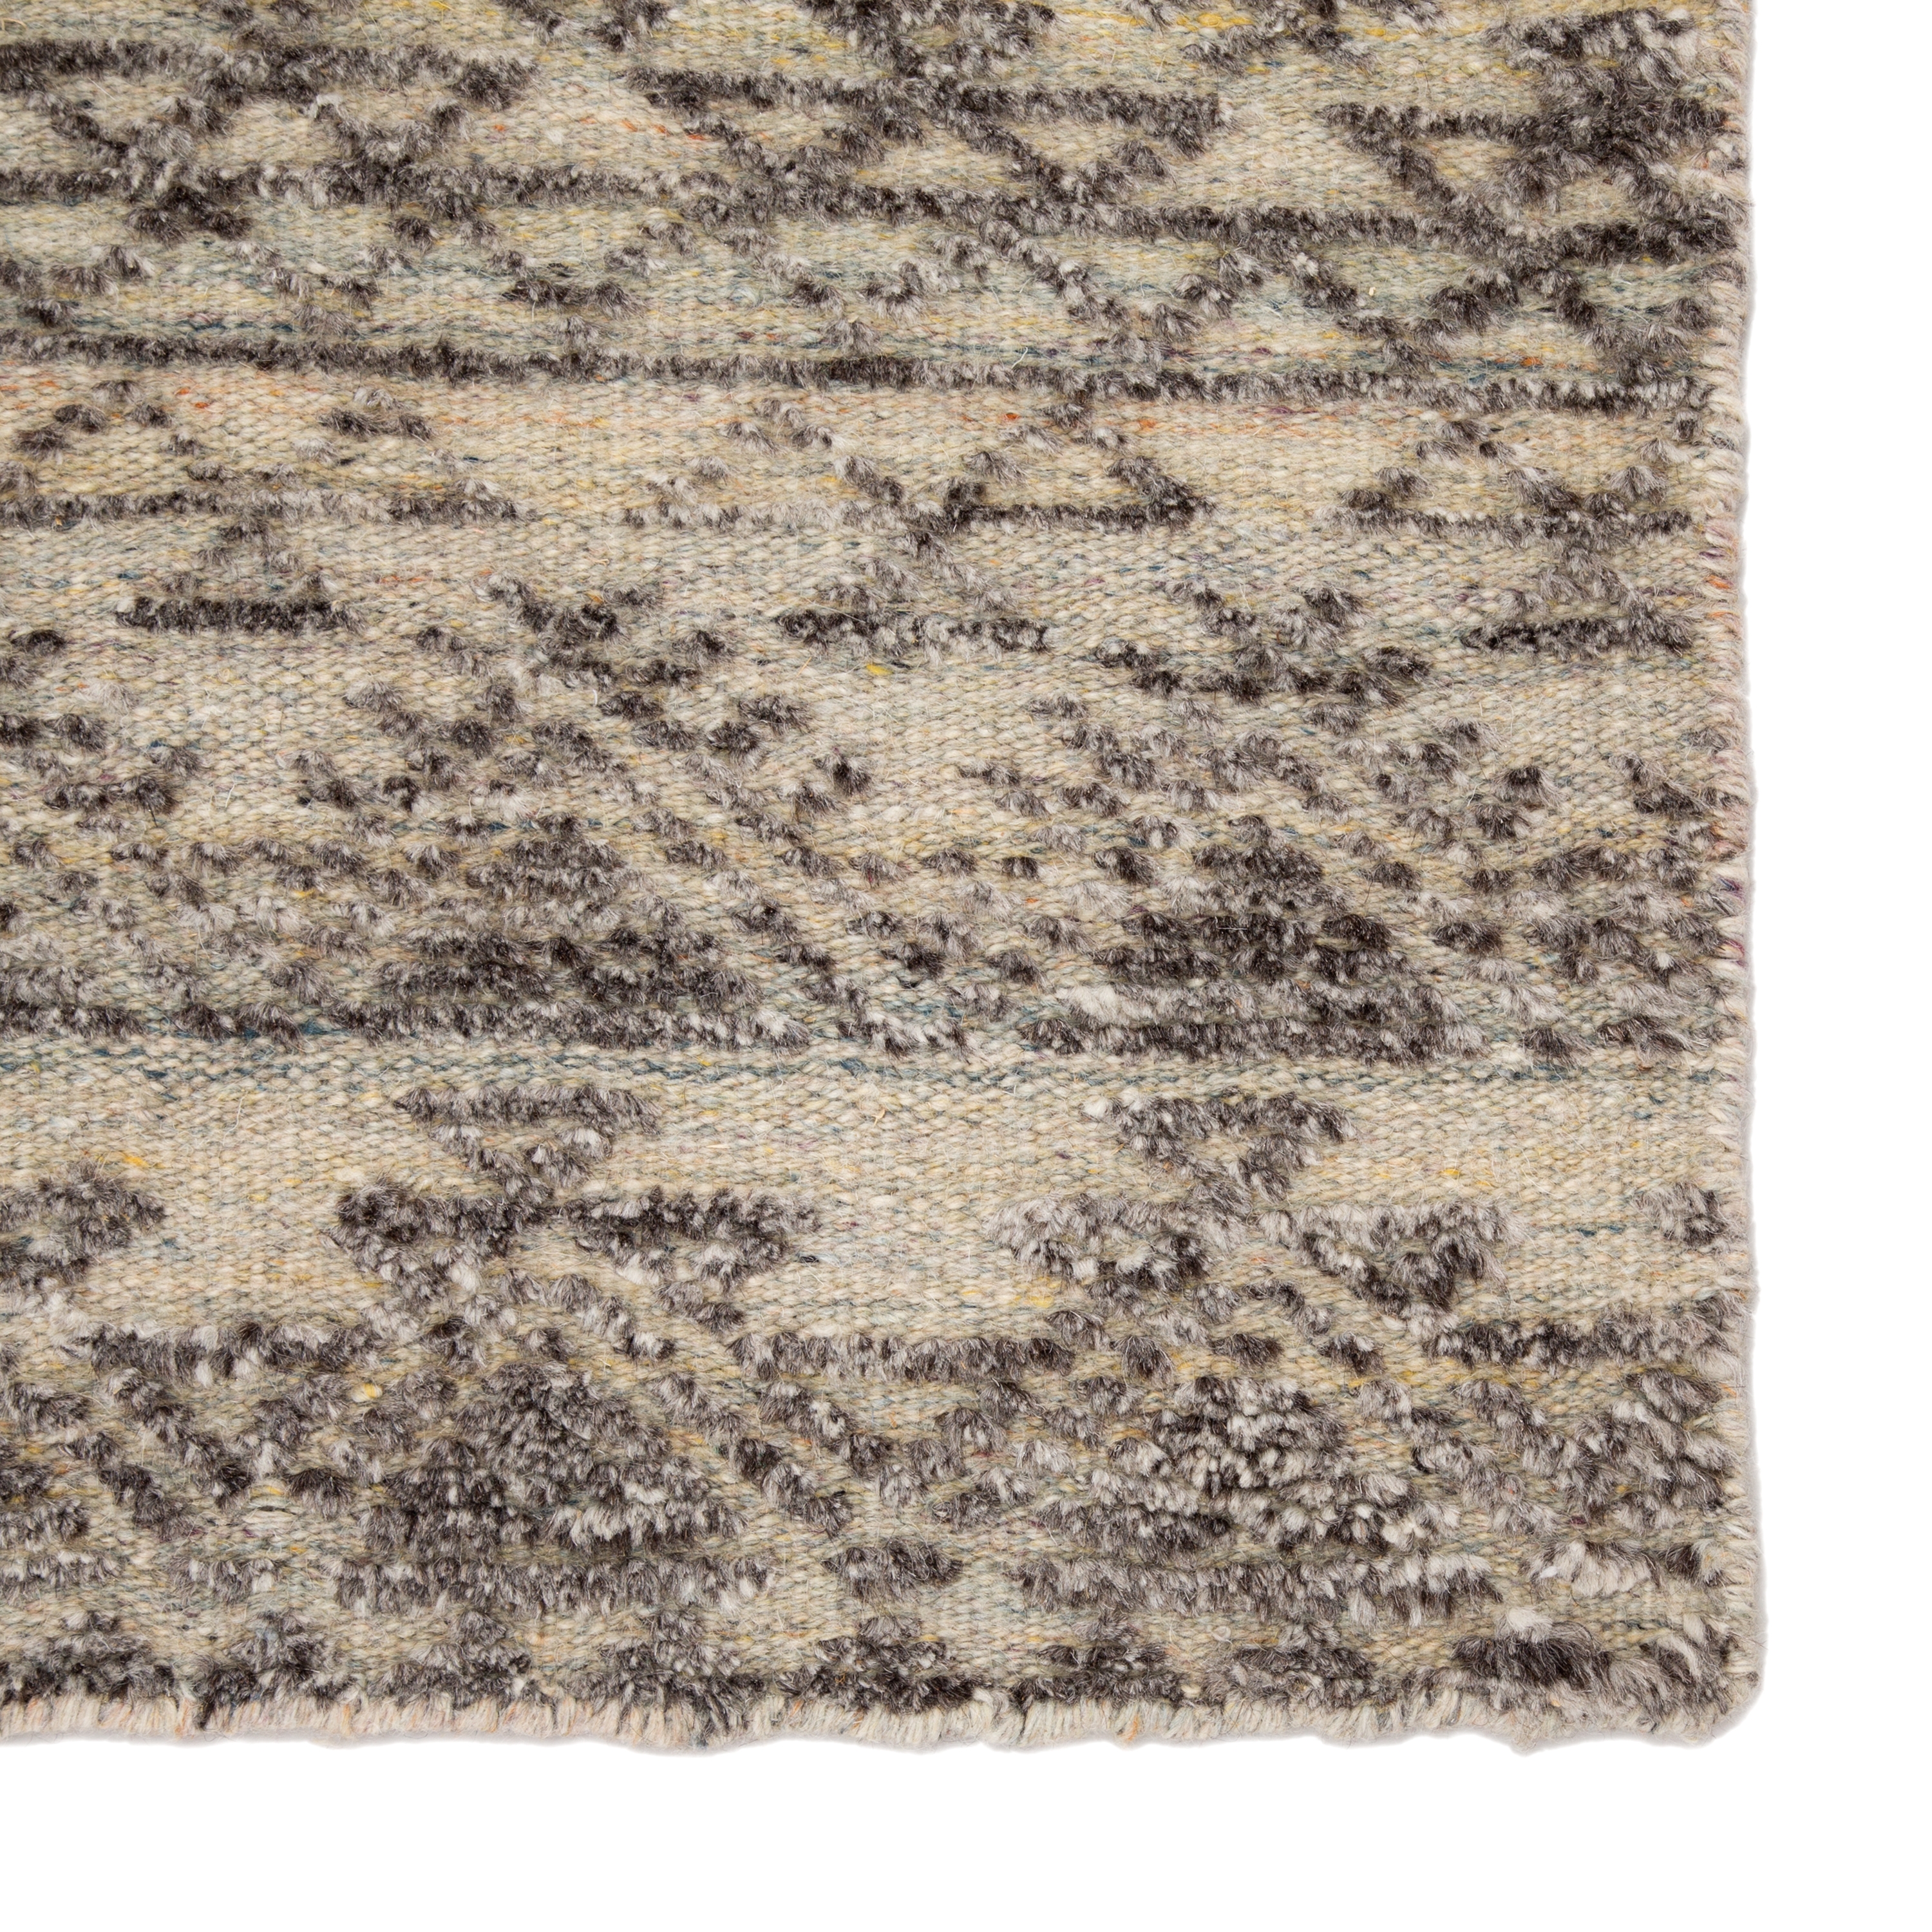 Prentice Hand-Knotted Geometric Dark Gray/ Taupe Area Rug (8'X11') - Image 3